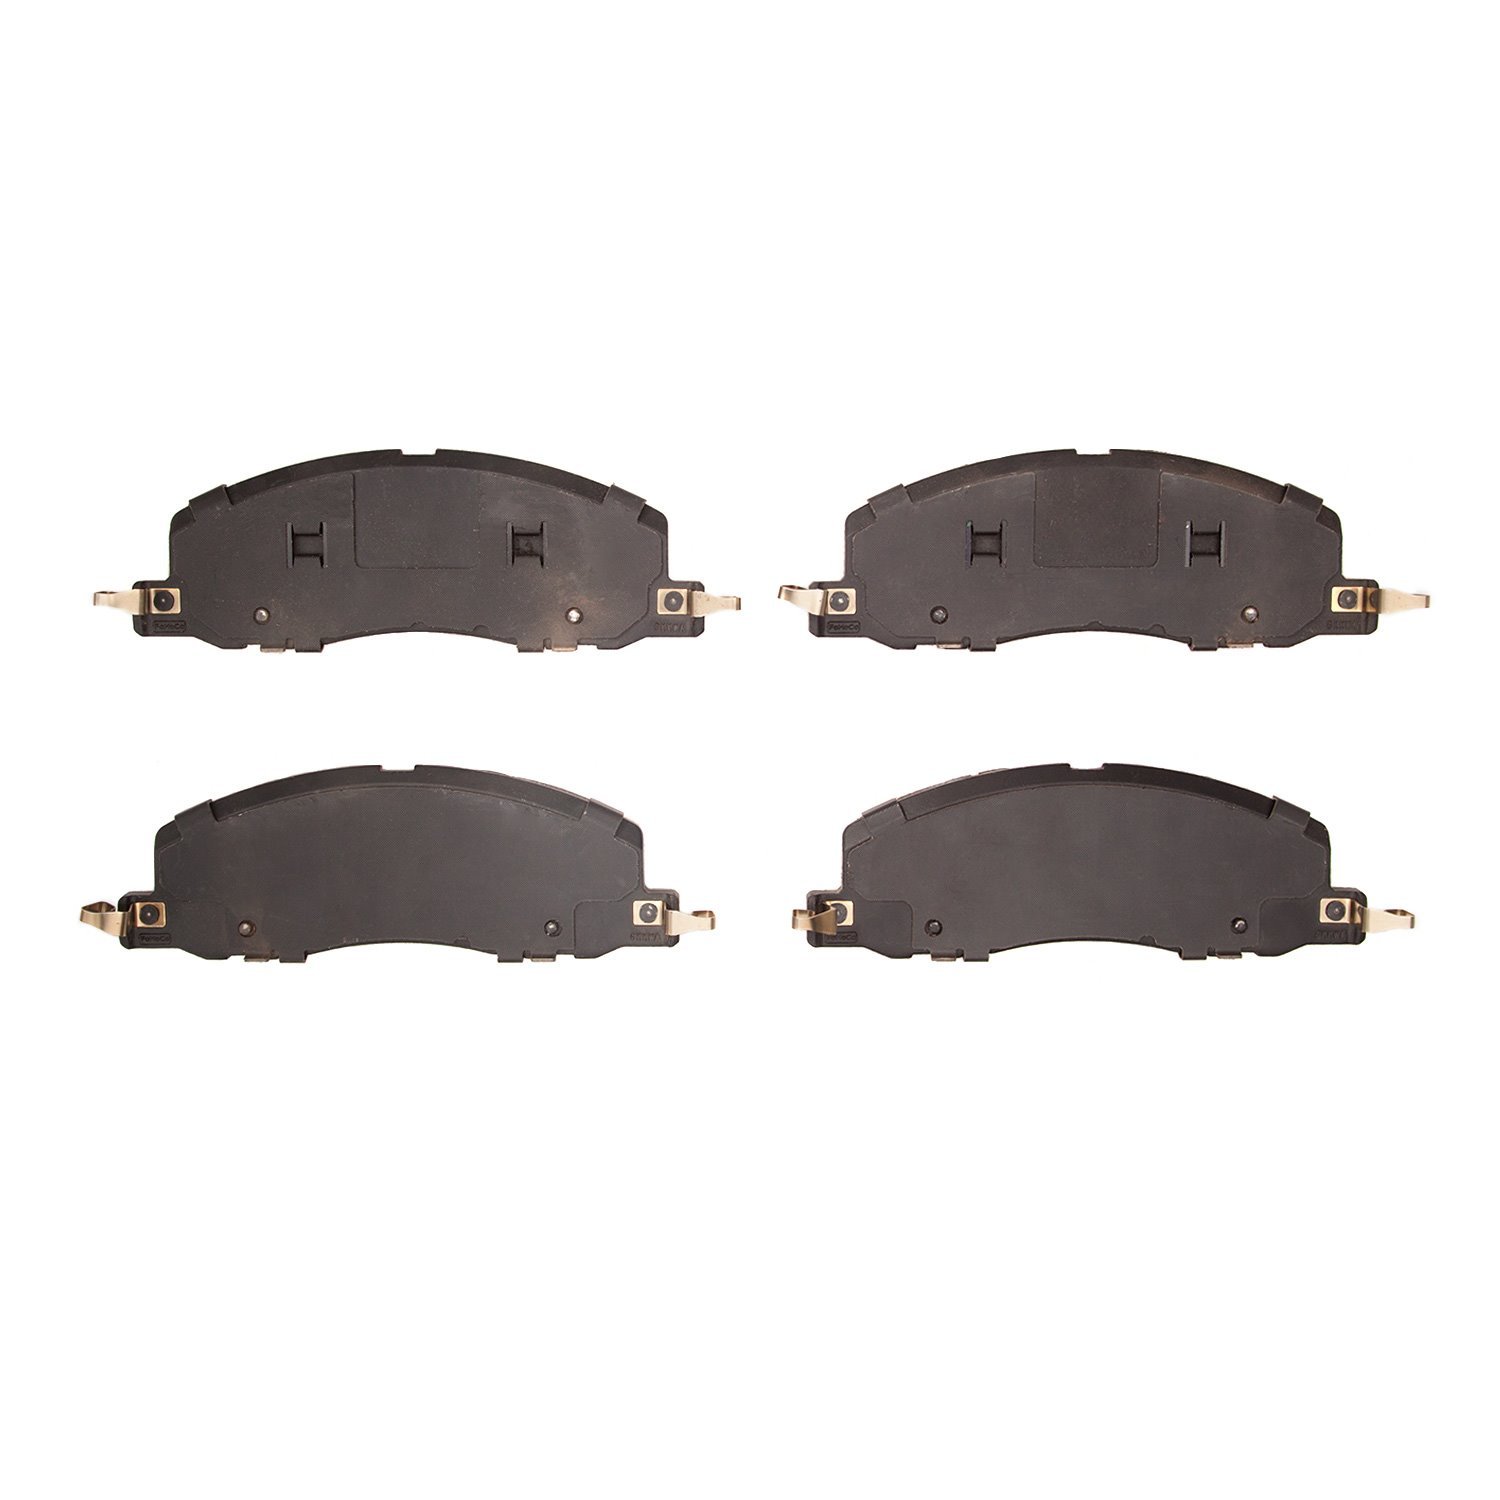 1551-2230-00 5000 Advanced Ceramic Brake Pads, Fits Select Ford/Lincoln/Mercury/Mazda, Position: Front